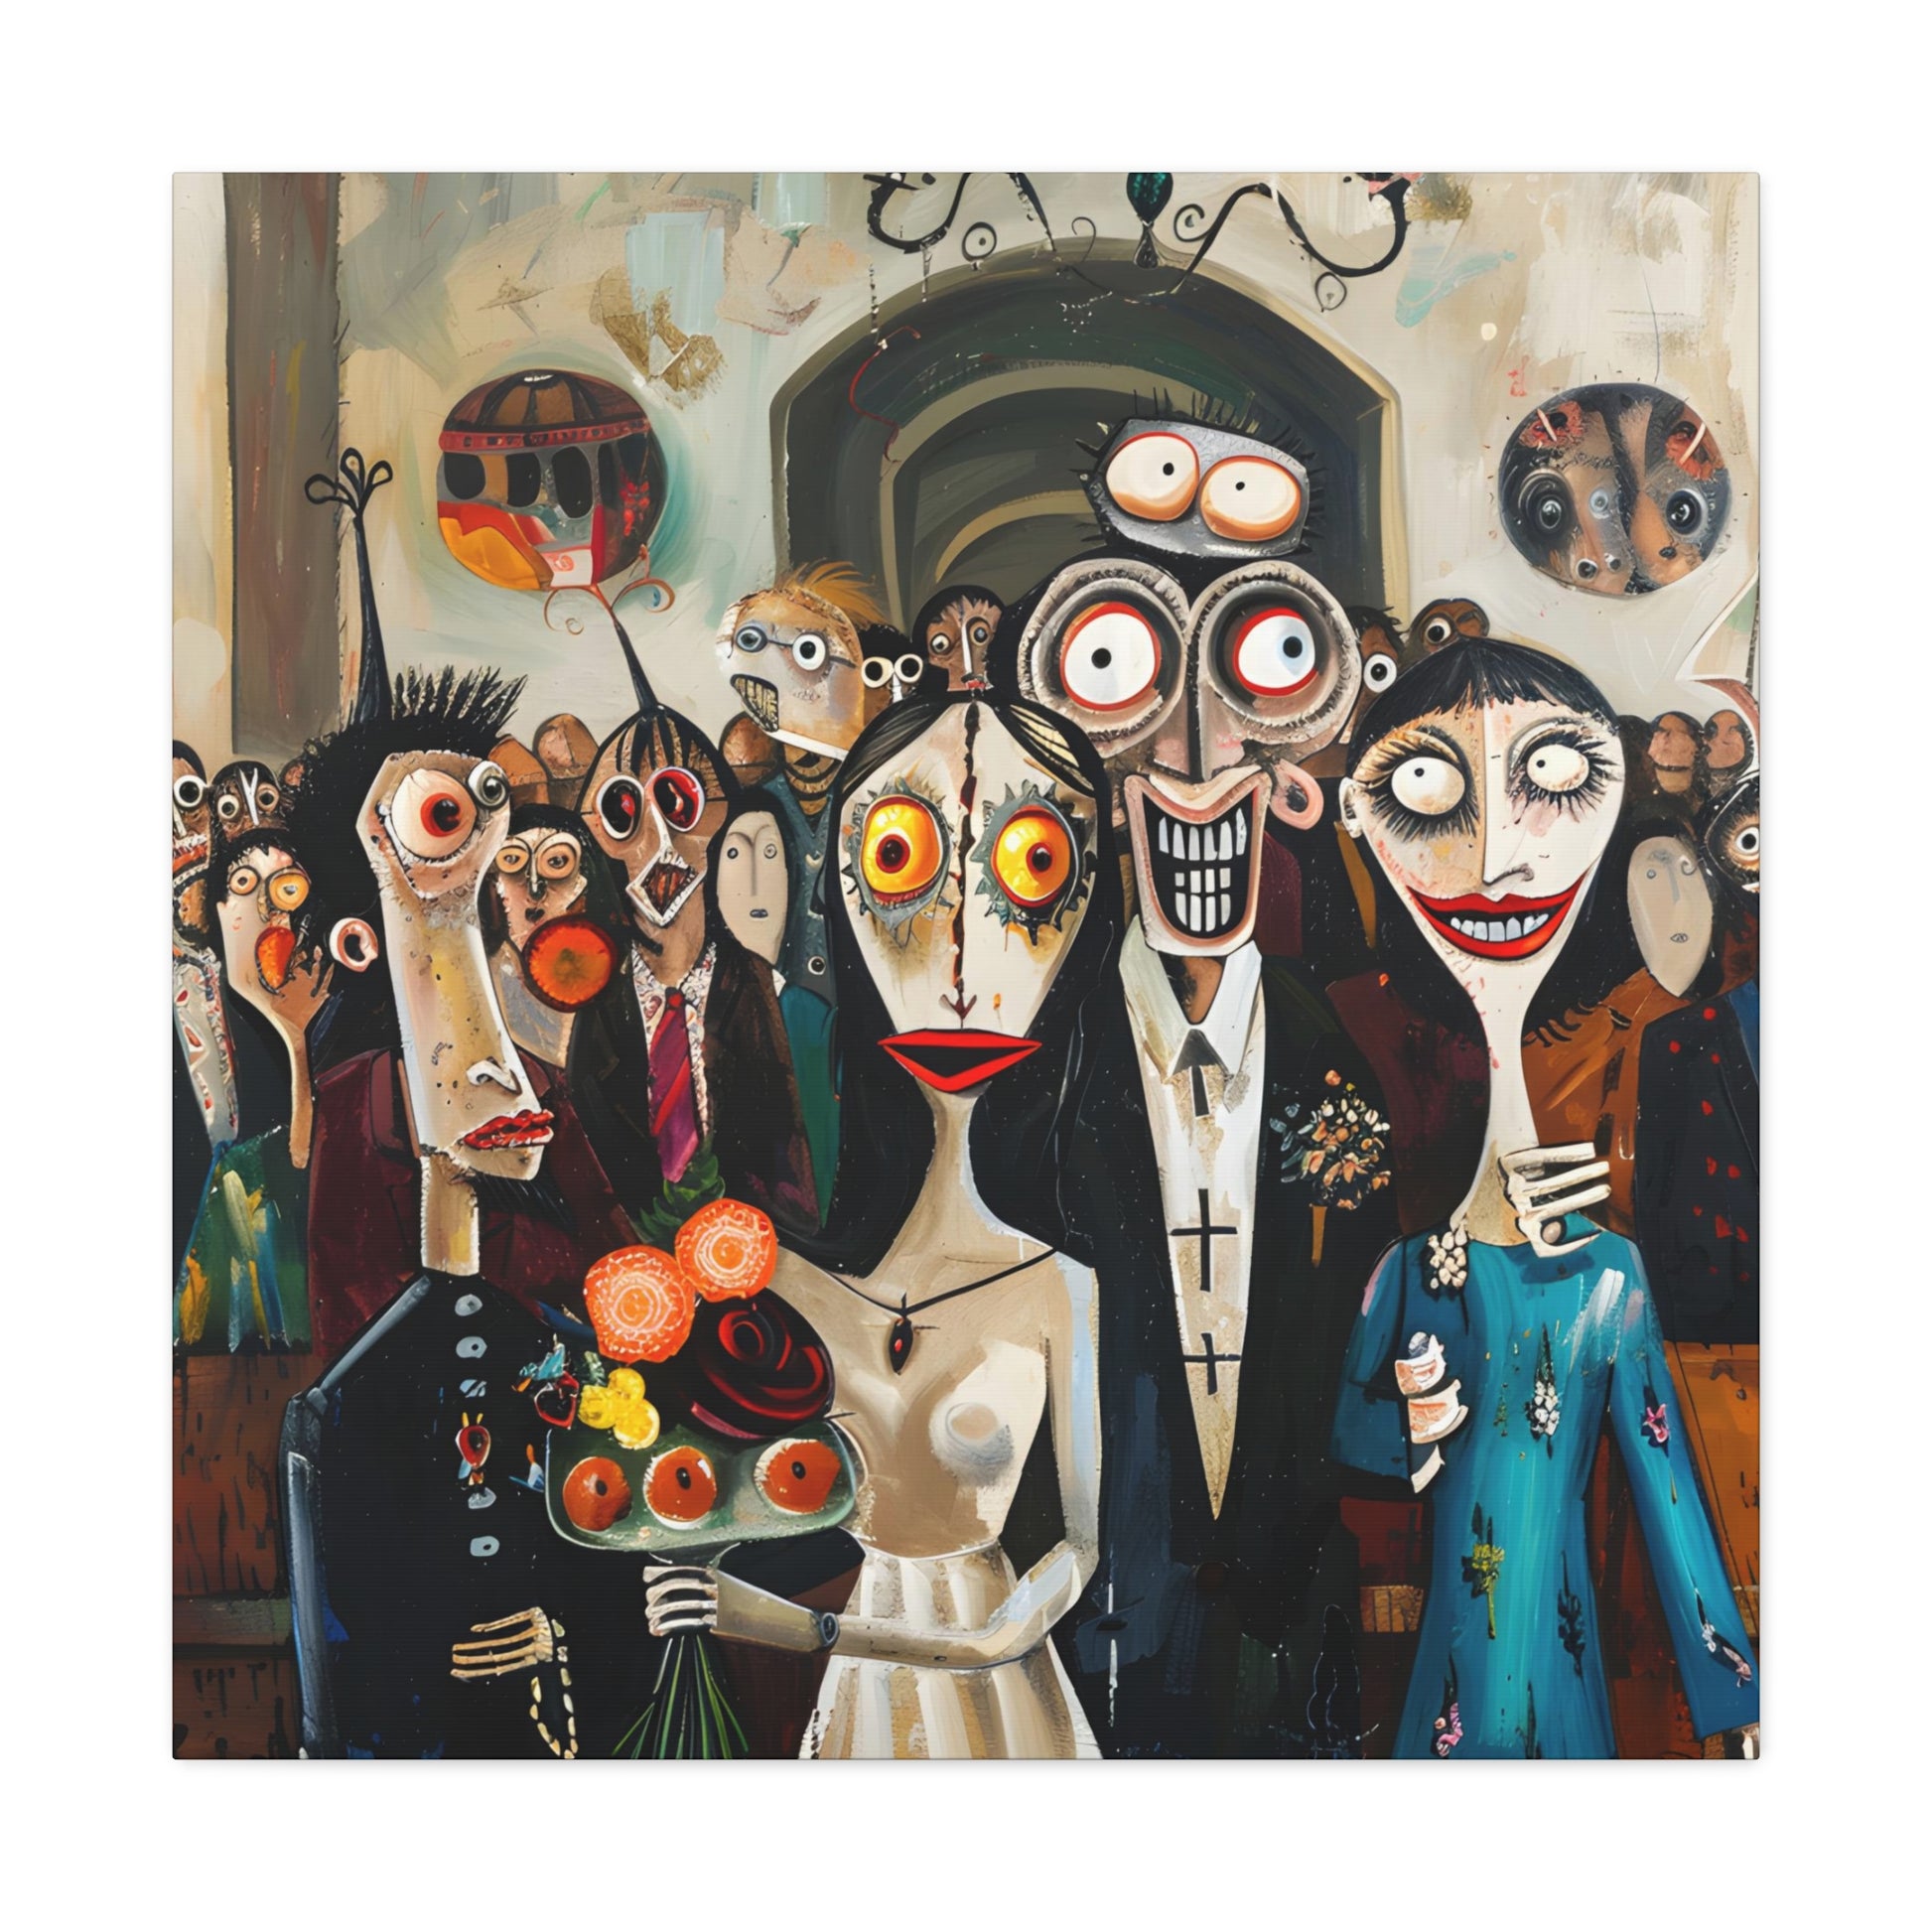 image 3 Whimsical wedding scene with caricatured bride and groom, surrounded by guests with exaggerated, comical expressions, set against a backdrop of abstract and surreal elements